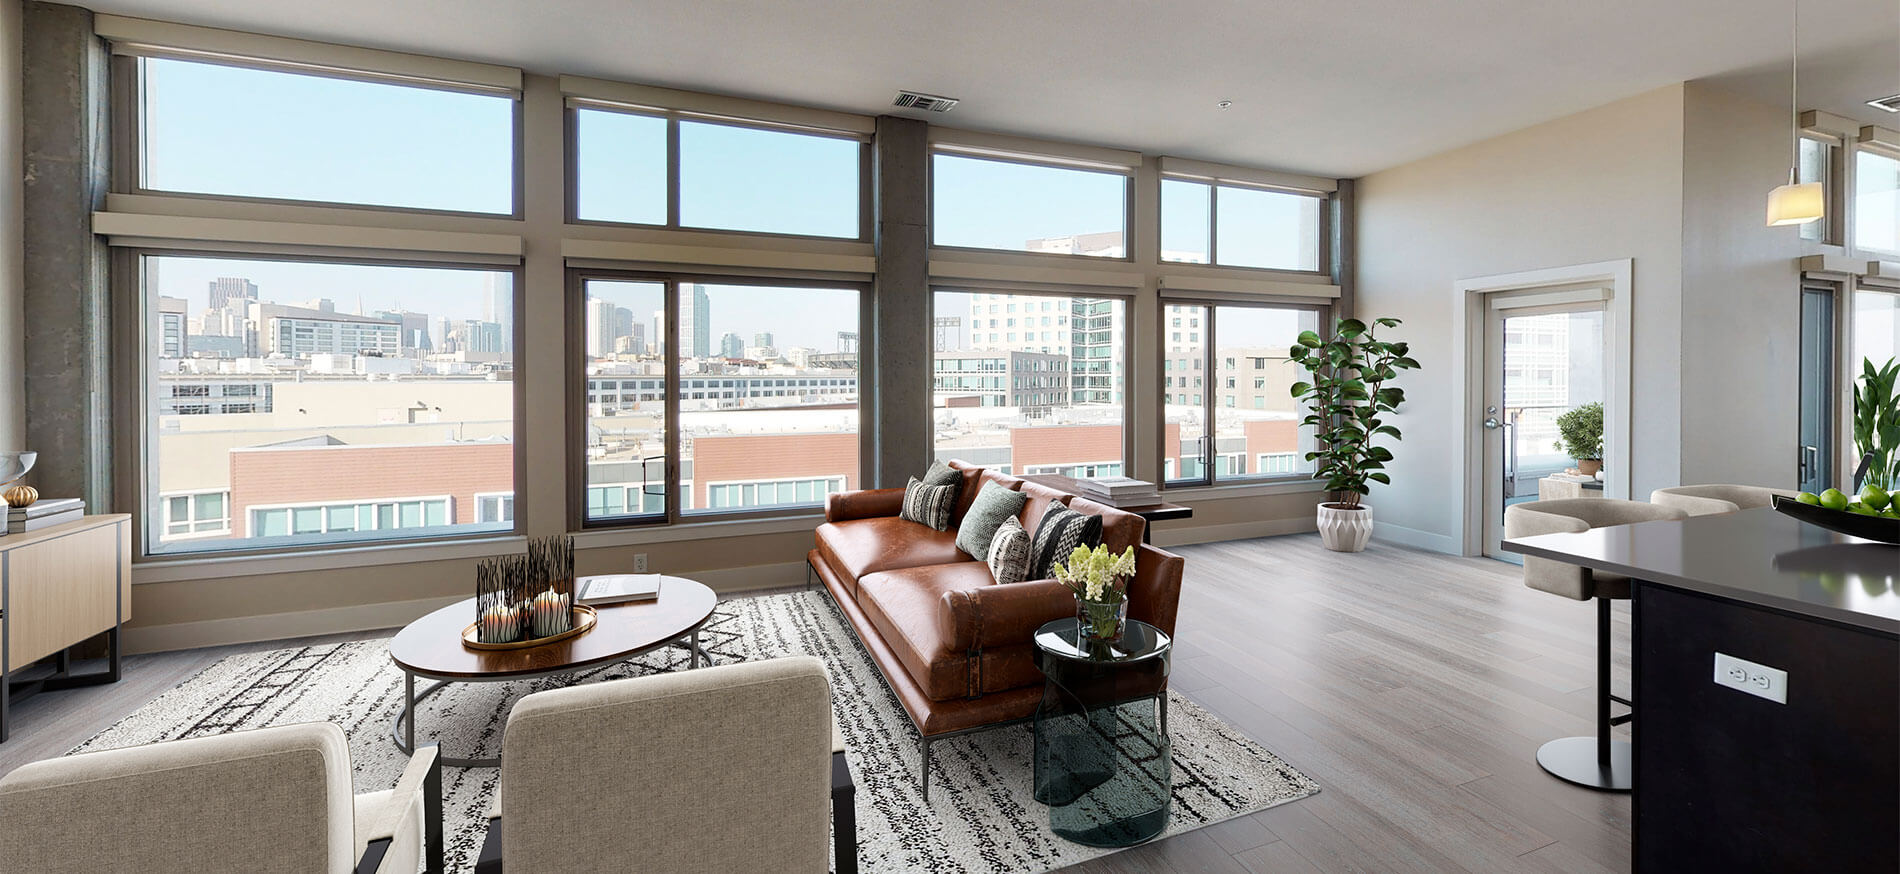 Channel Mission Bay penthouse living room